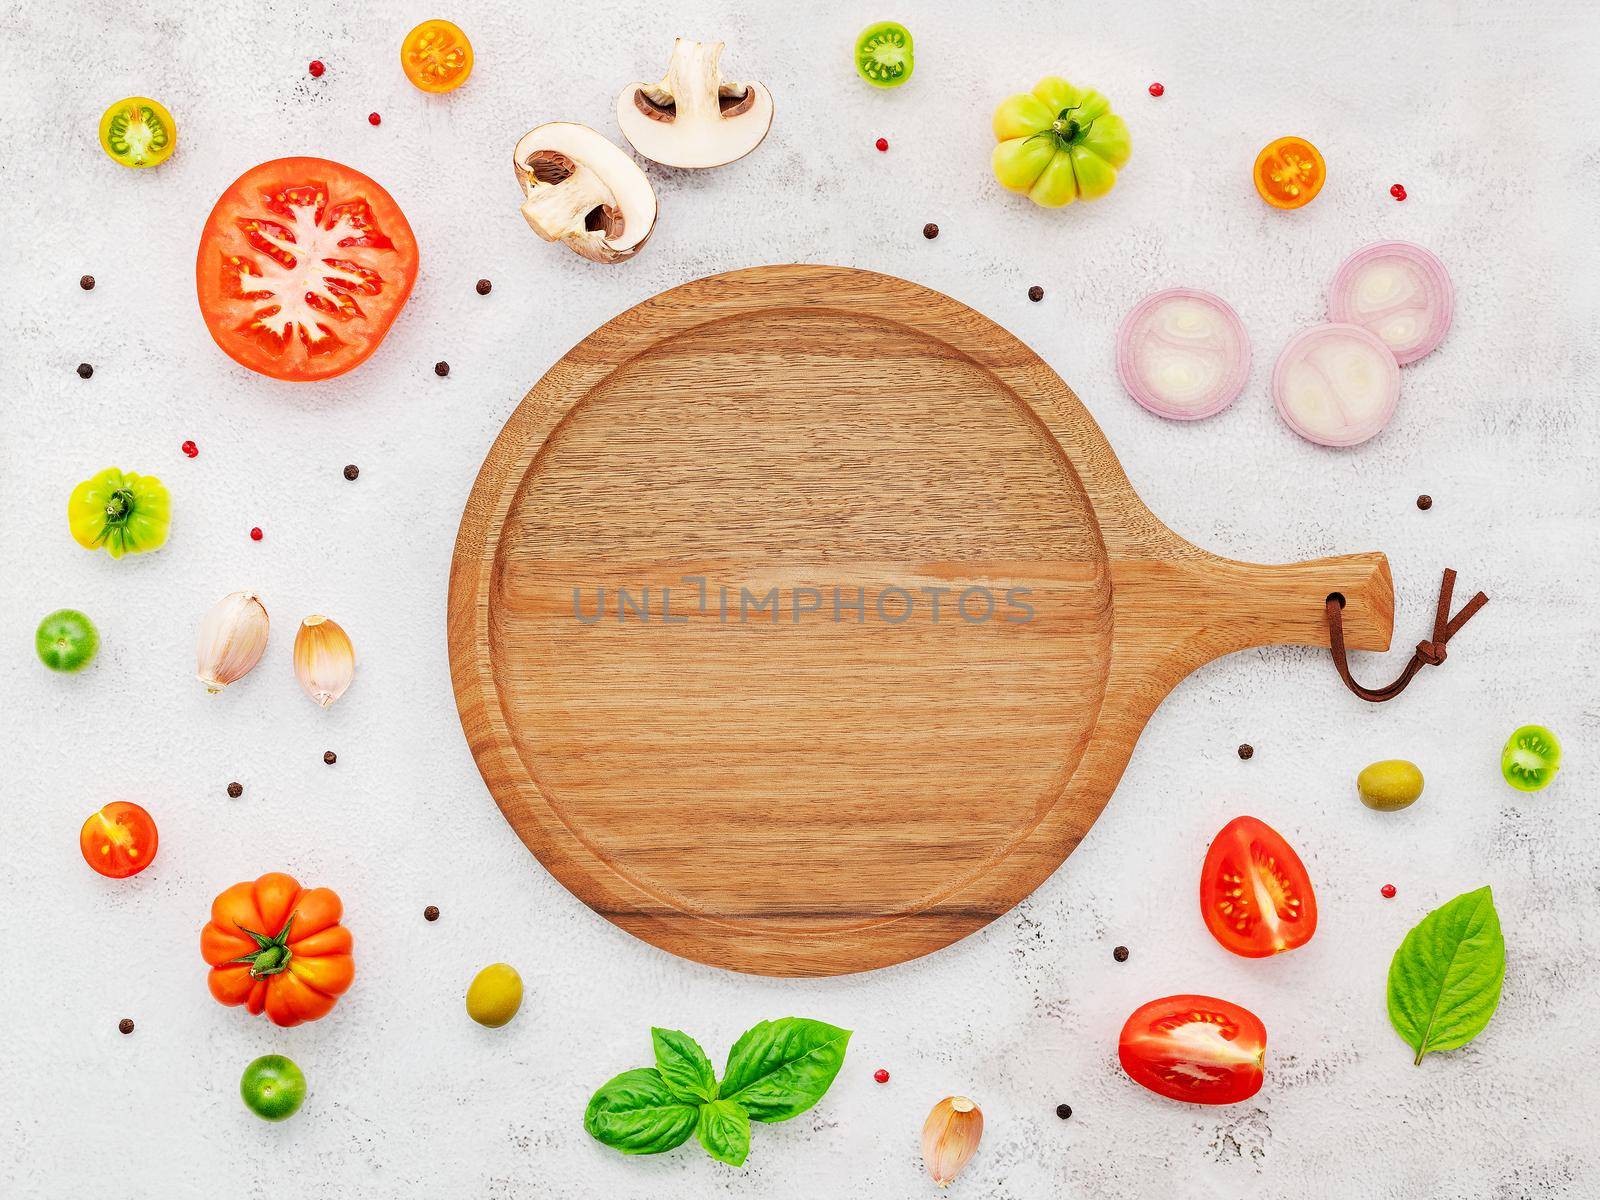 The ingredients for homemade pizza set up on white concrete background. by kerdkanno